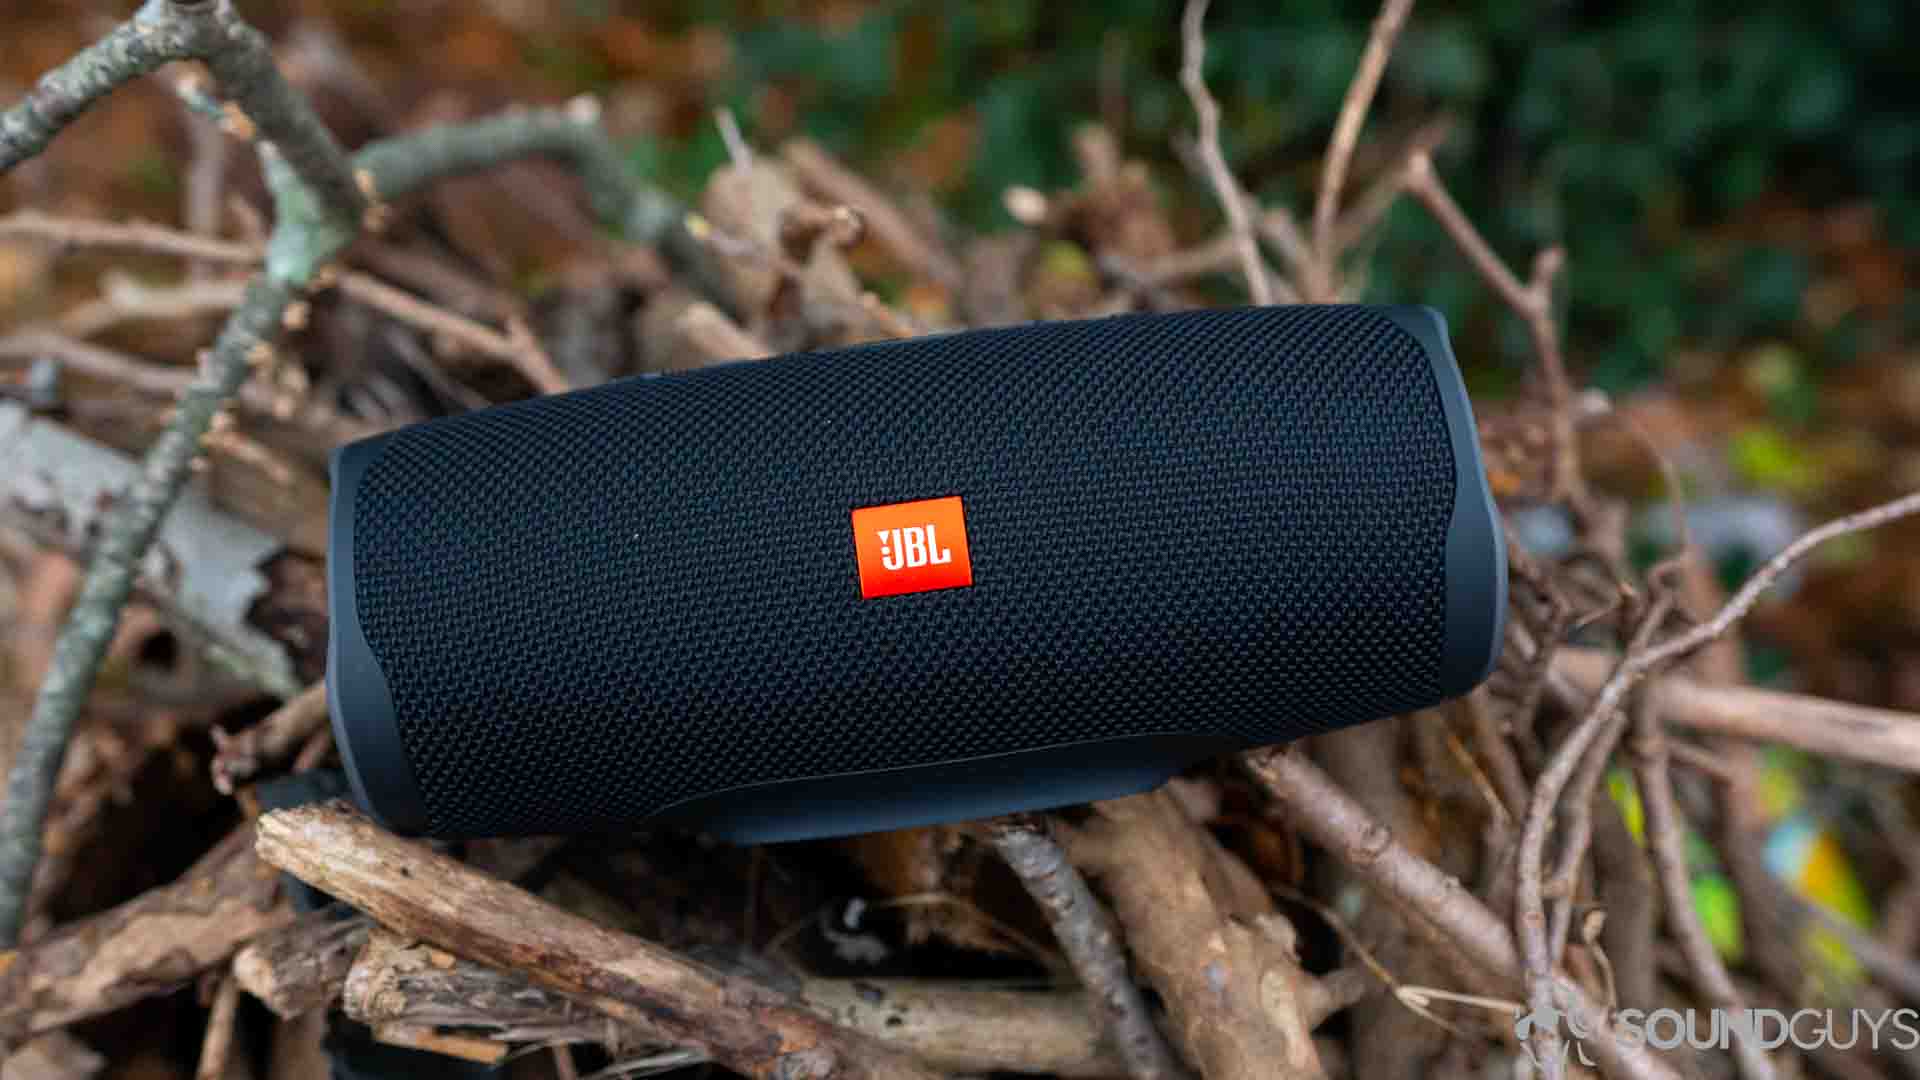 Pictured is the JBL Charge 4 from the front.